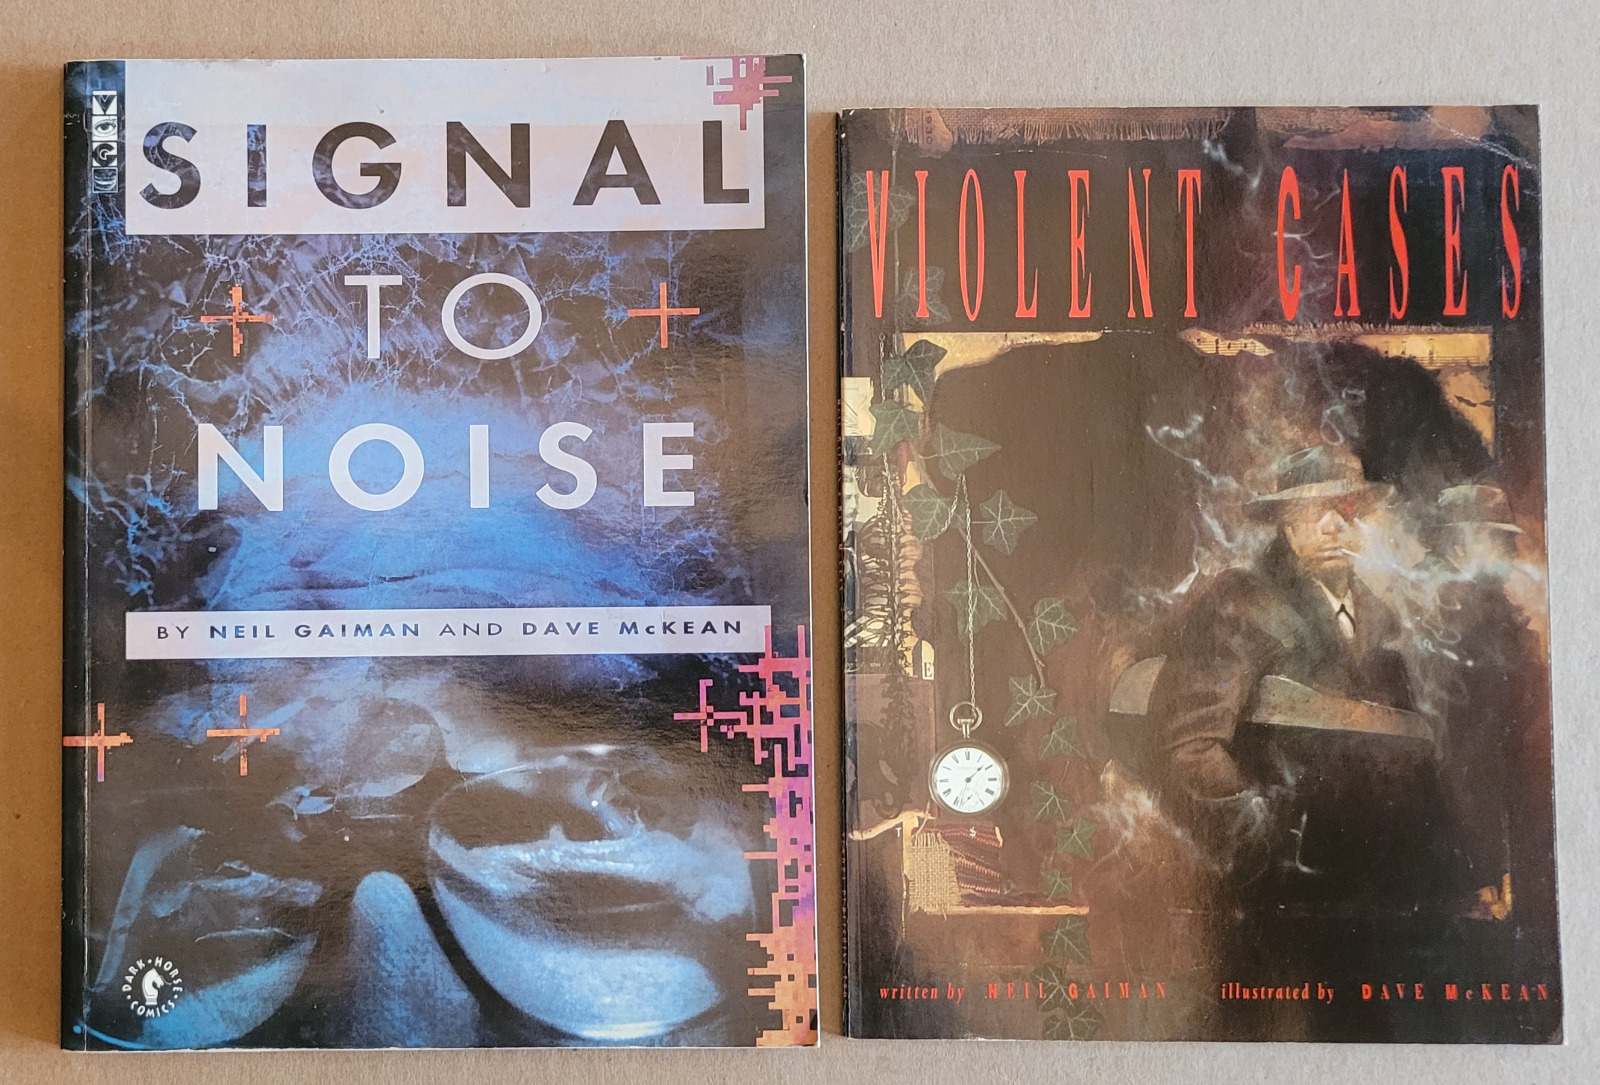 Signal to Noise and Violent Cases, graphic novels by Neil Gaiman and Dave McKean